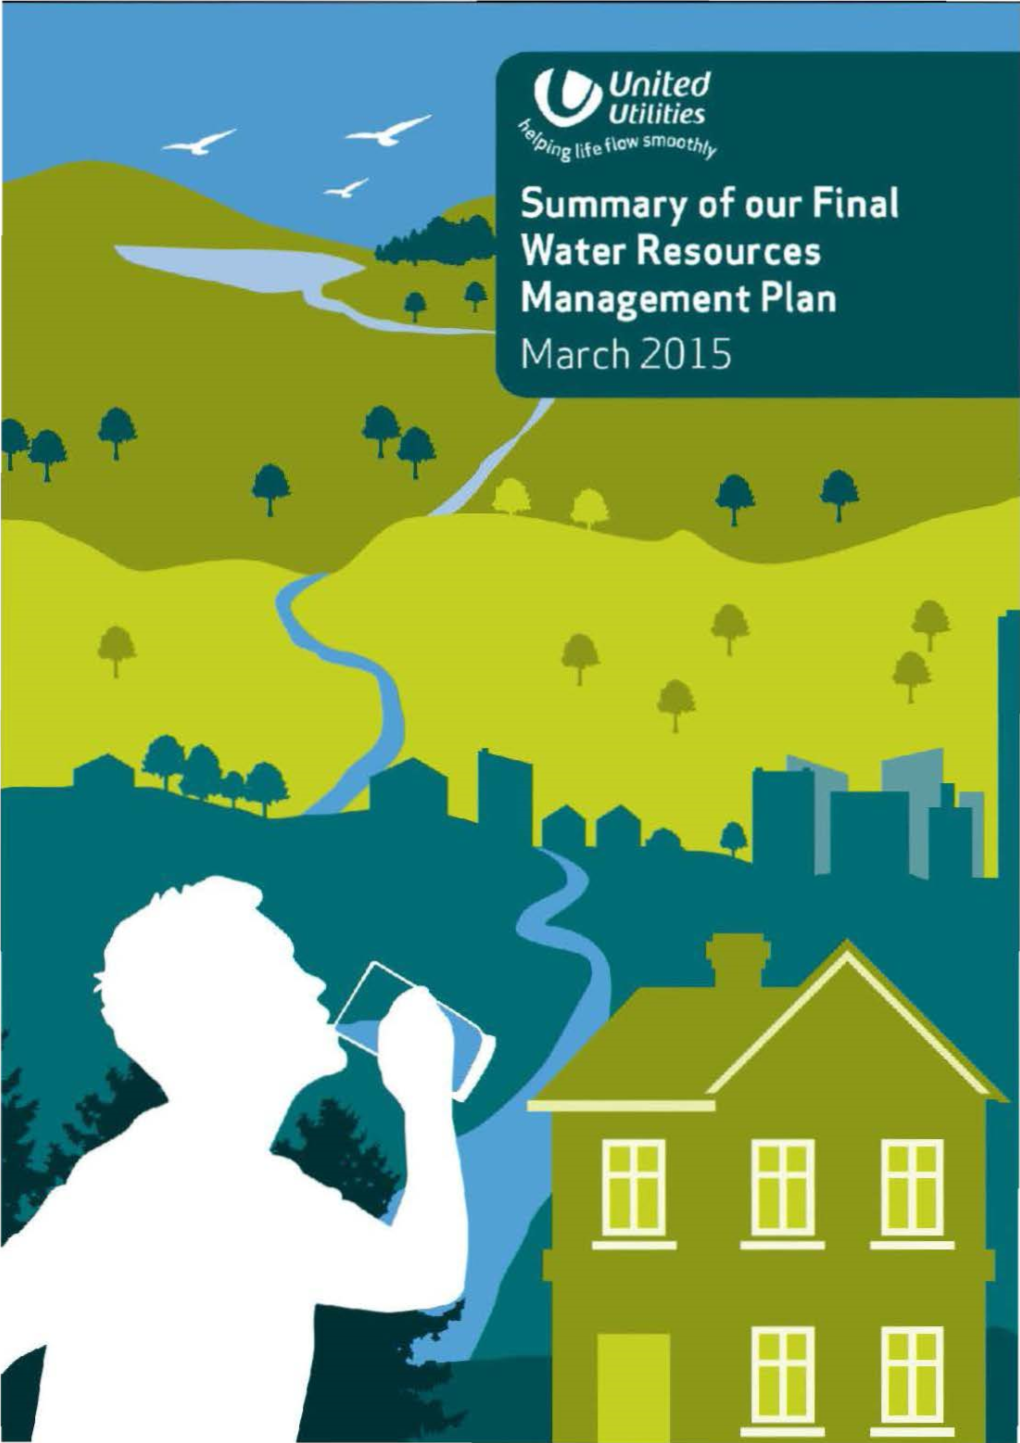 Summary of Our Final Water Resources Management Plan